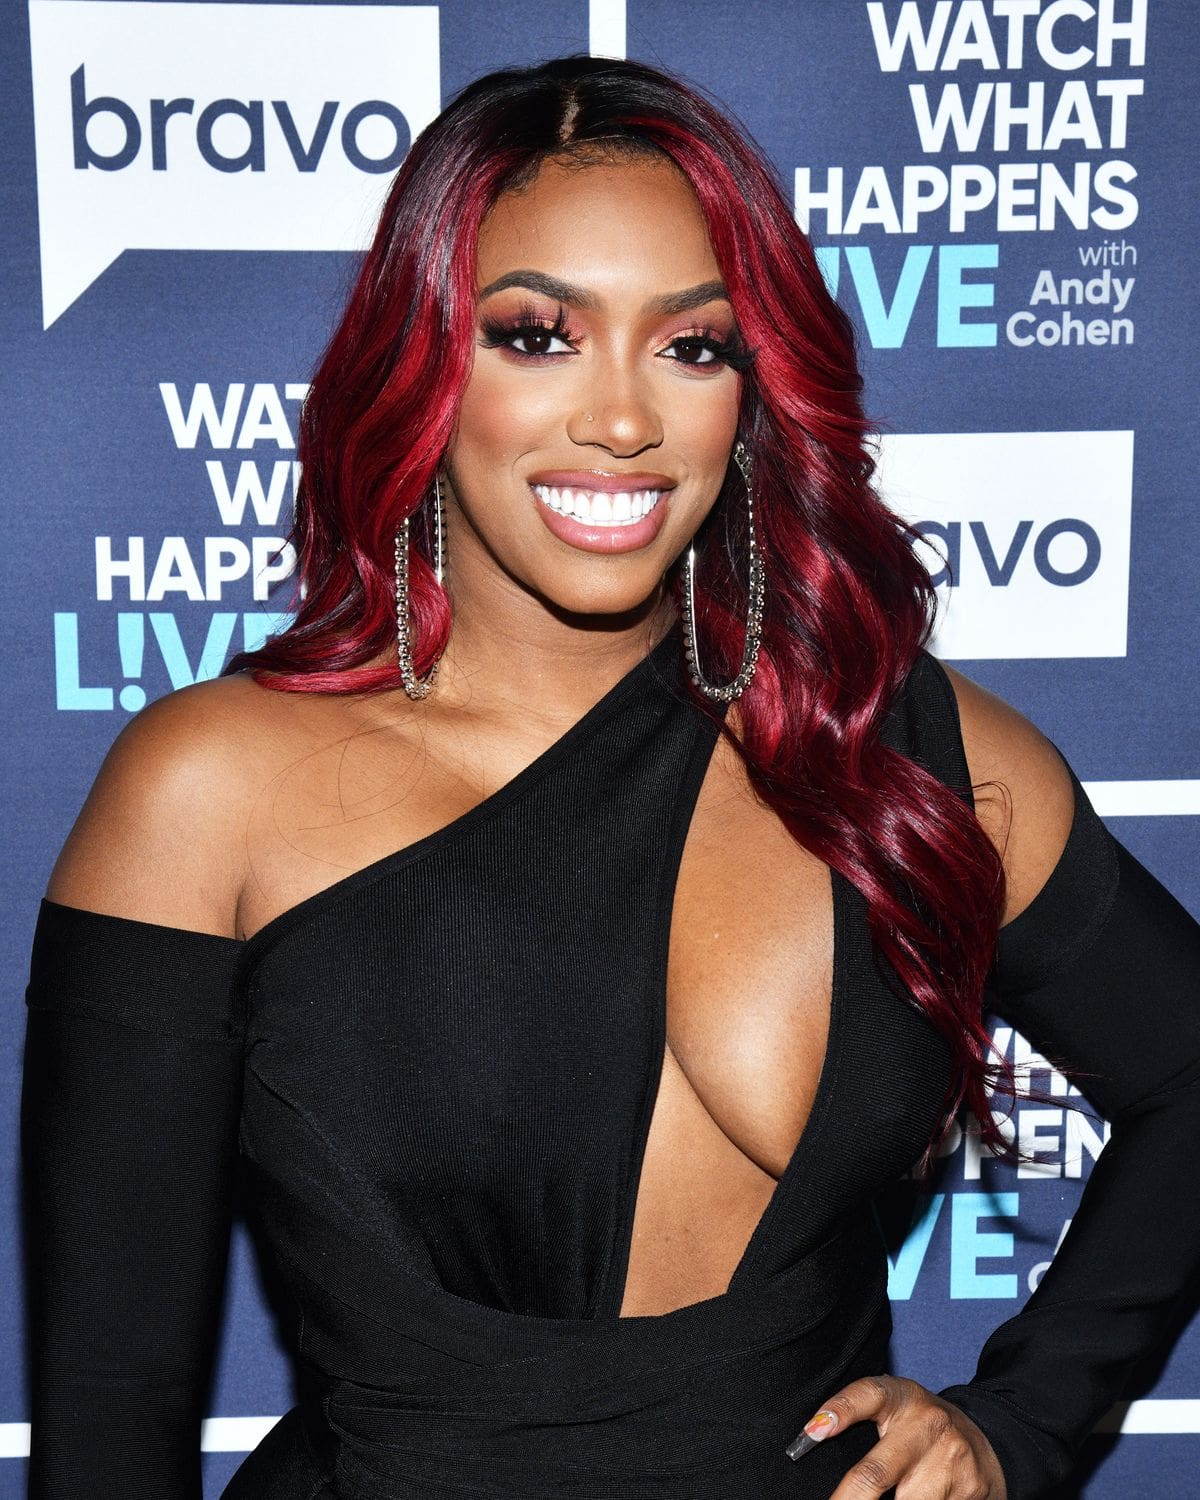 ”porsha-williams-impresses-fans-with-this-message-read-it-here”